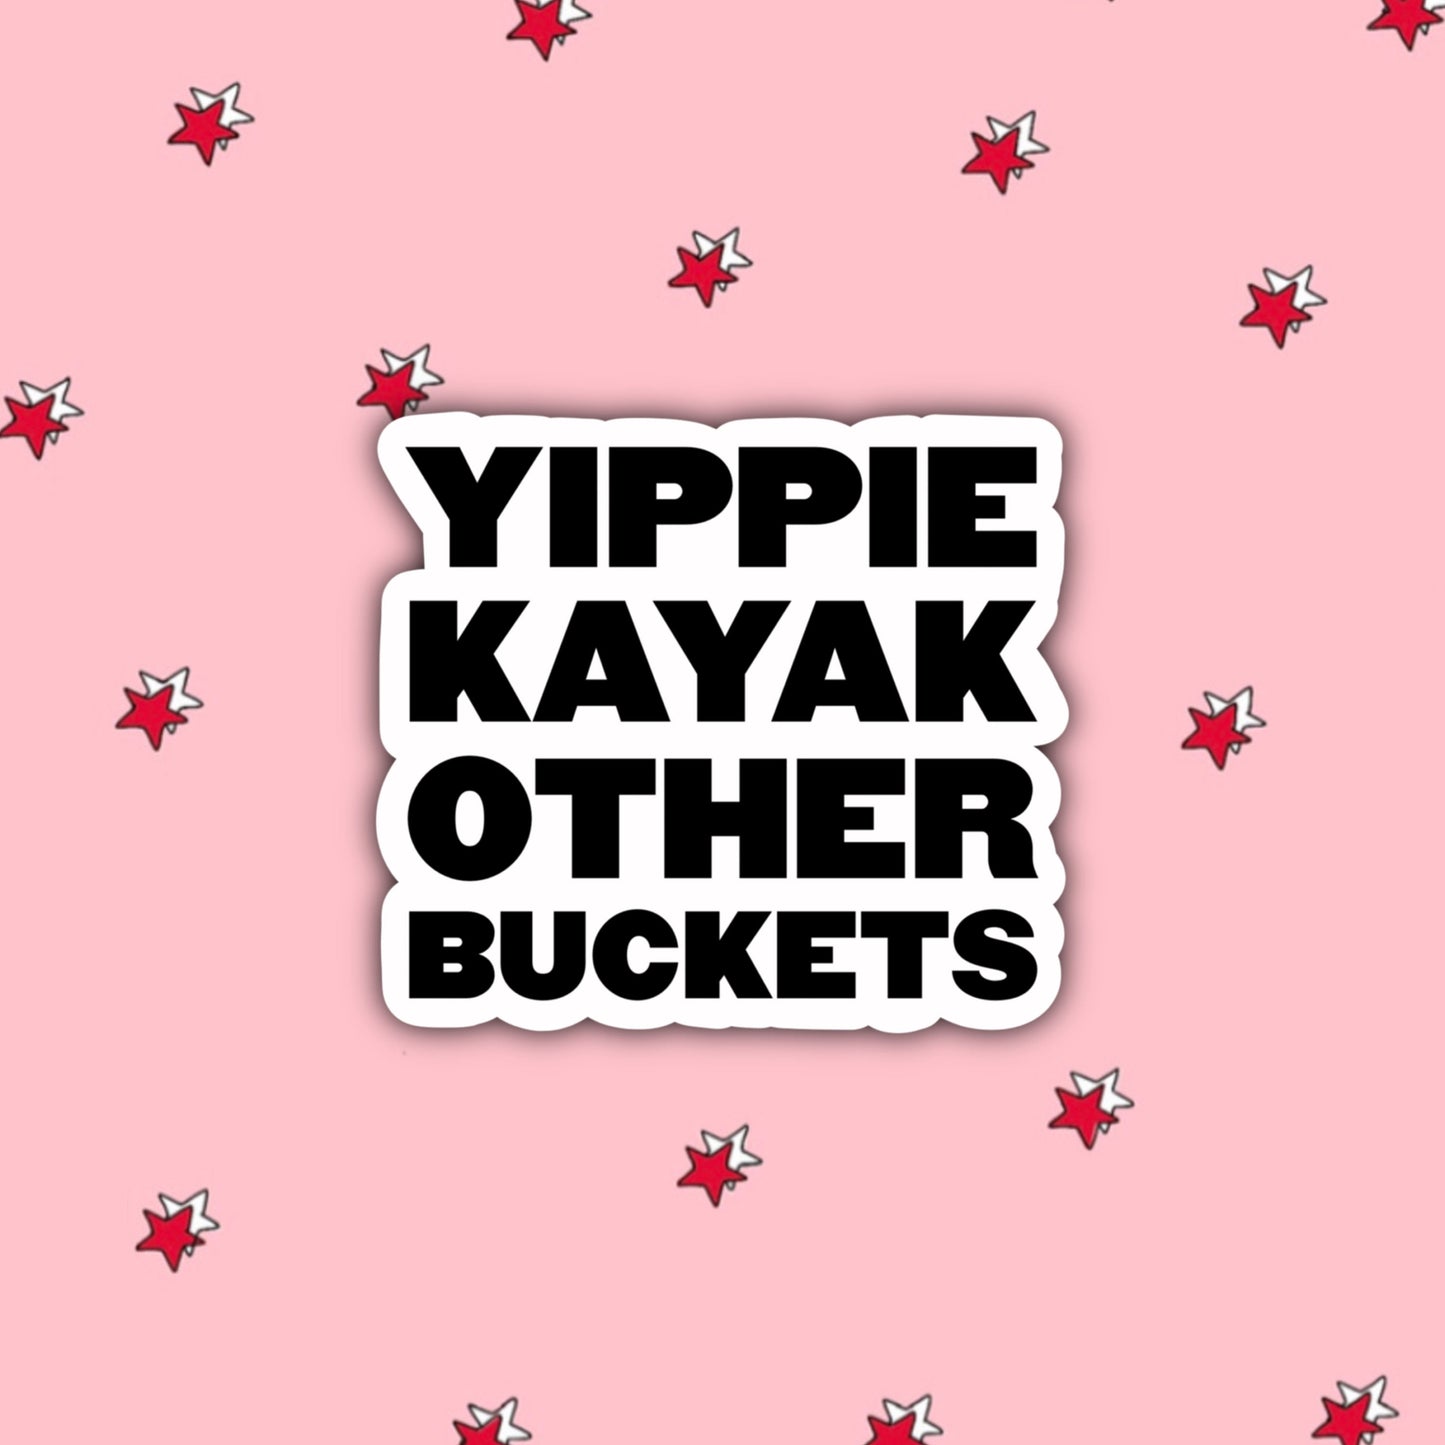 Yippie Kayak Other Buckets | Charles Boyle | Brooklyn 99 Stickers